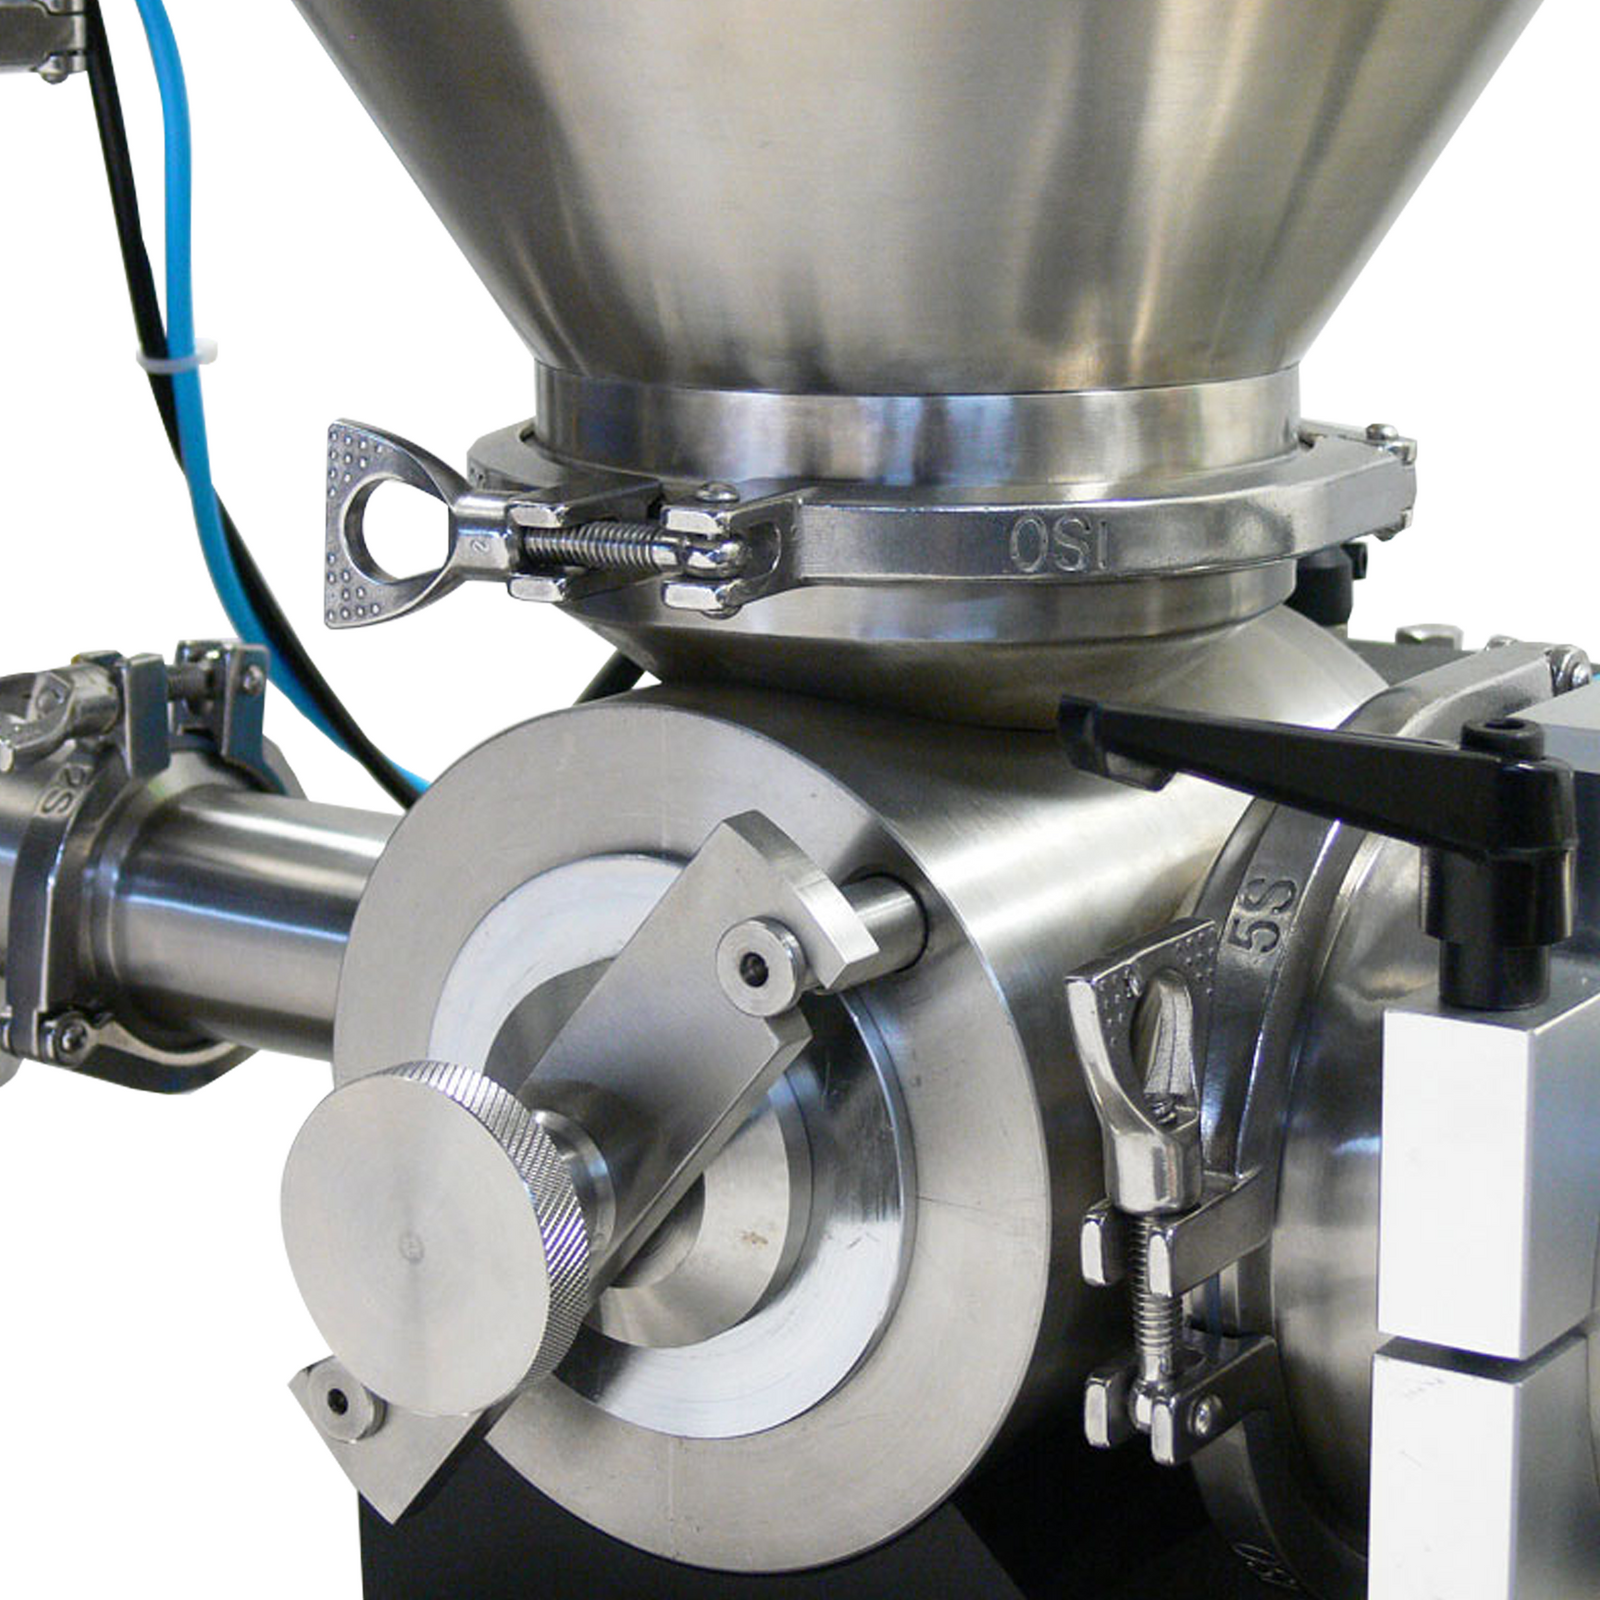 Close shows detail of the rotary valve of the JORES TECHNOLOGIES® Volumetric Piston filler and also detail of the base of the hopper and clamp